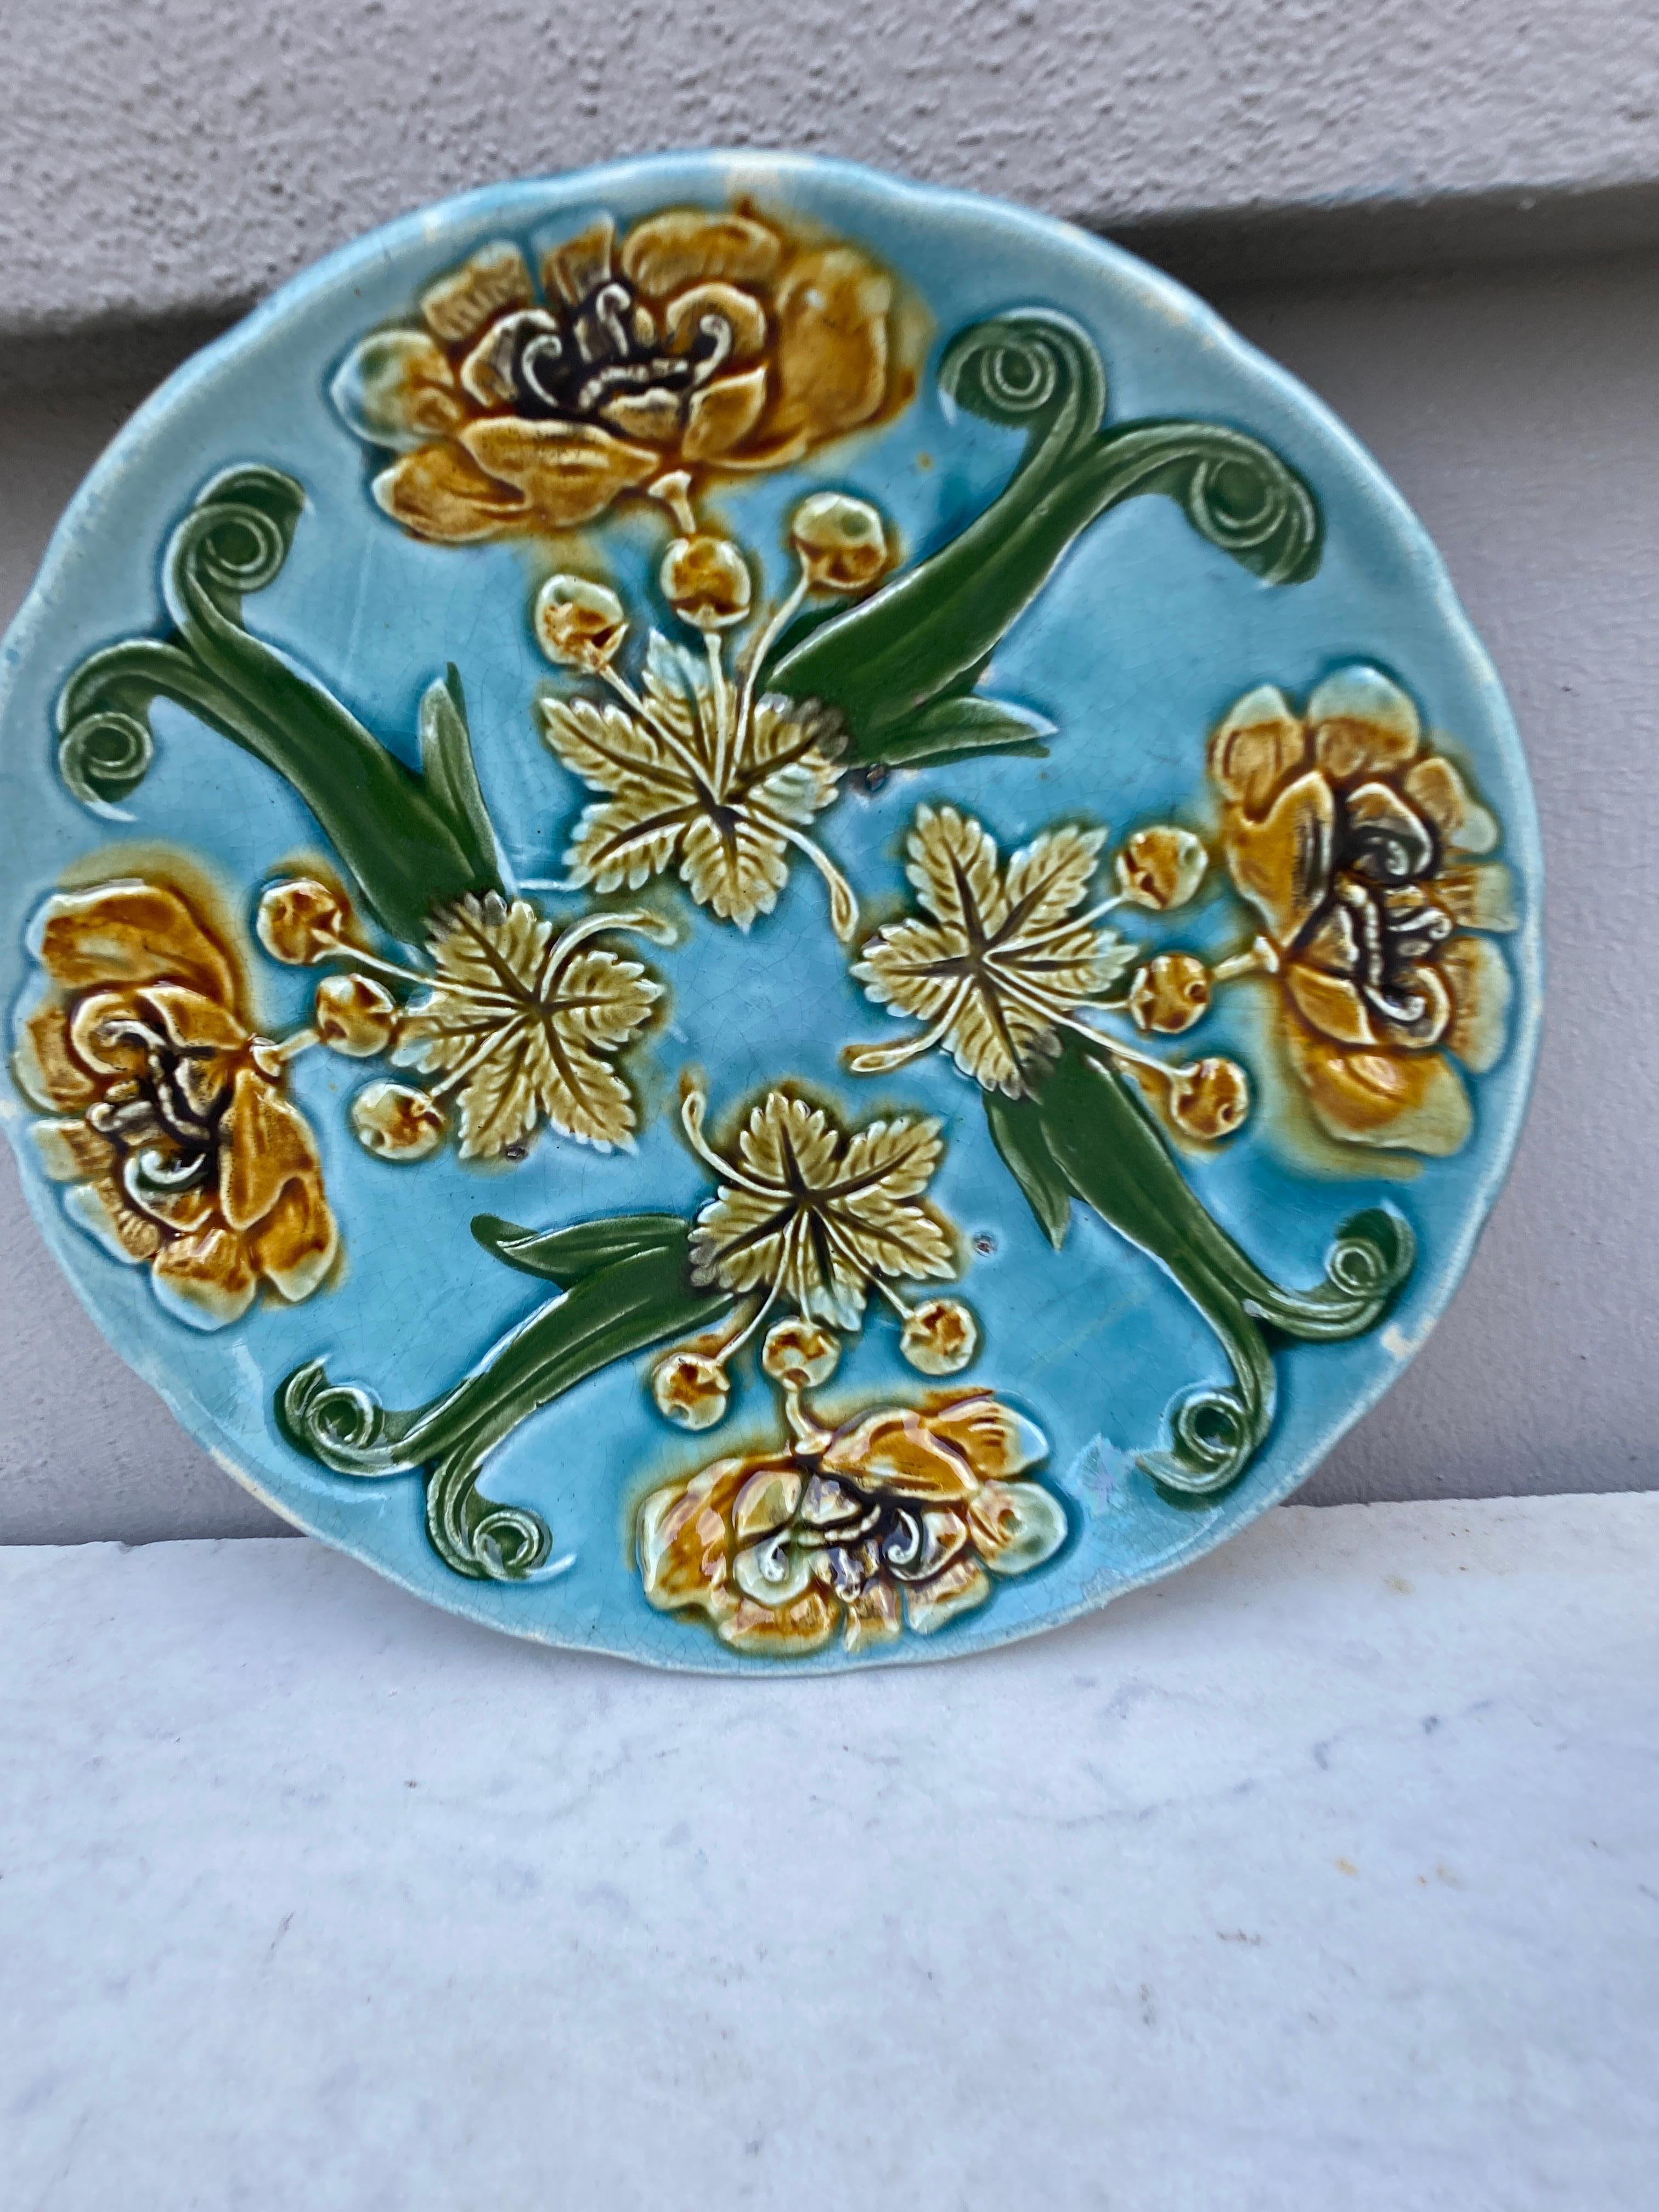 Rustic French Blue Majolica Plate with Yellow Flowers Circa 1890